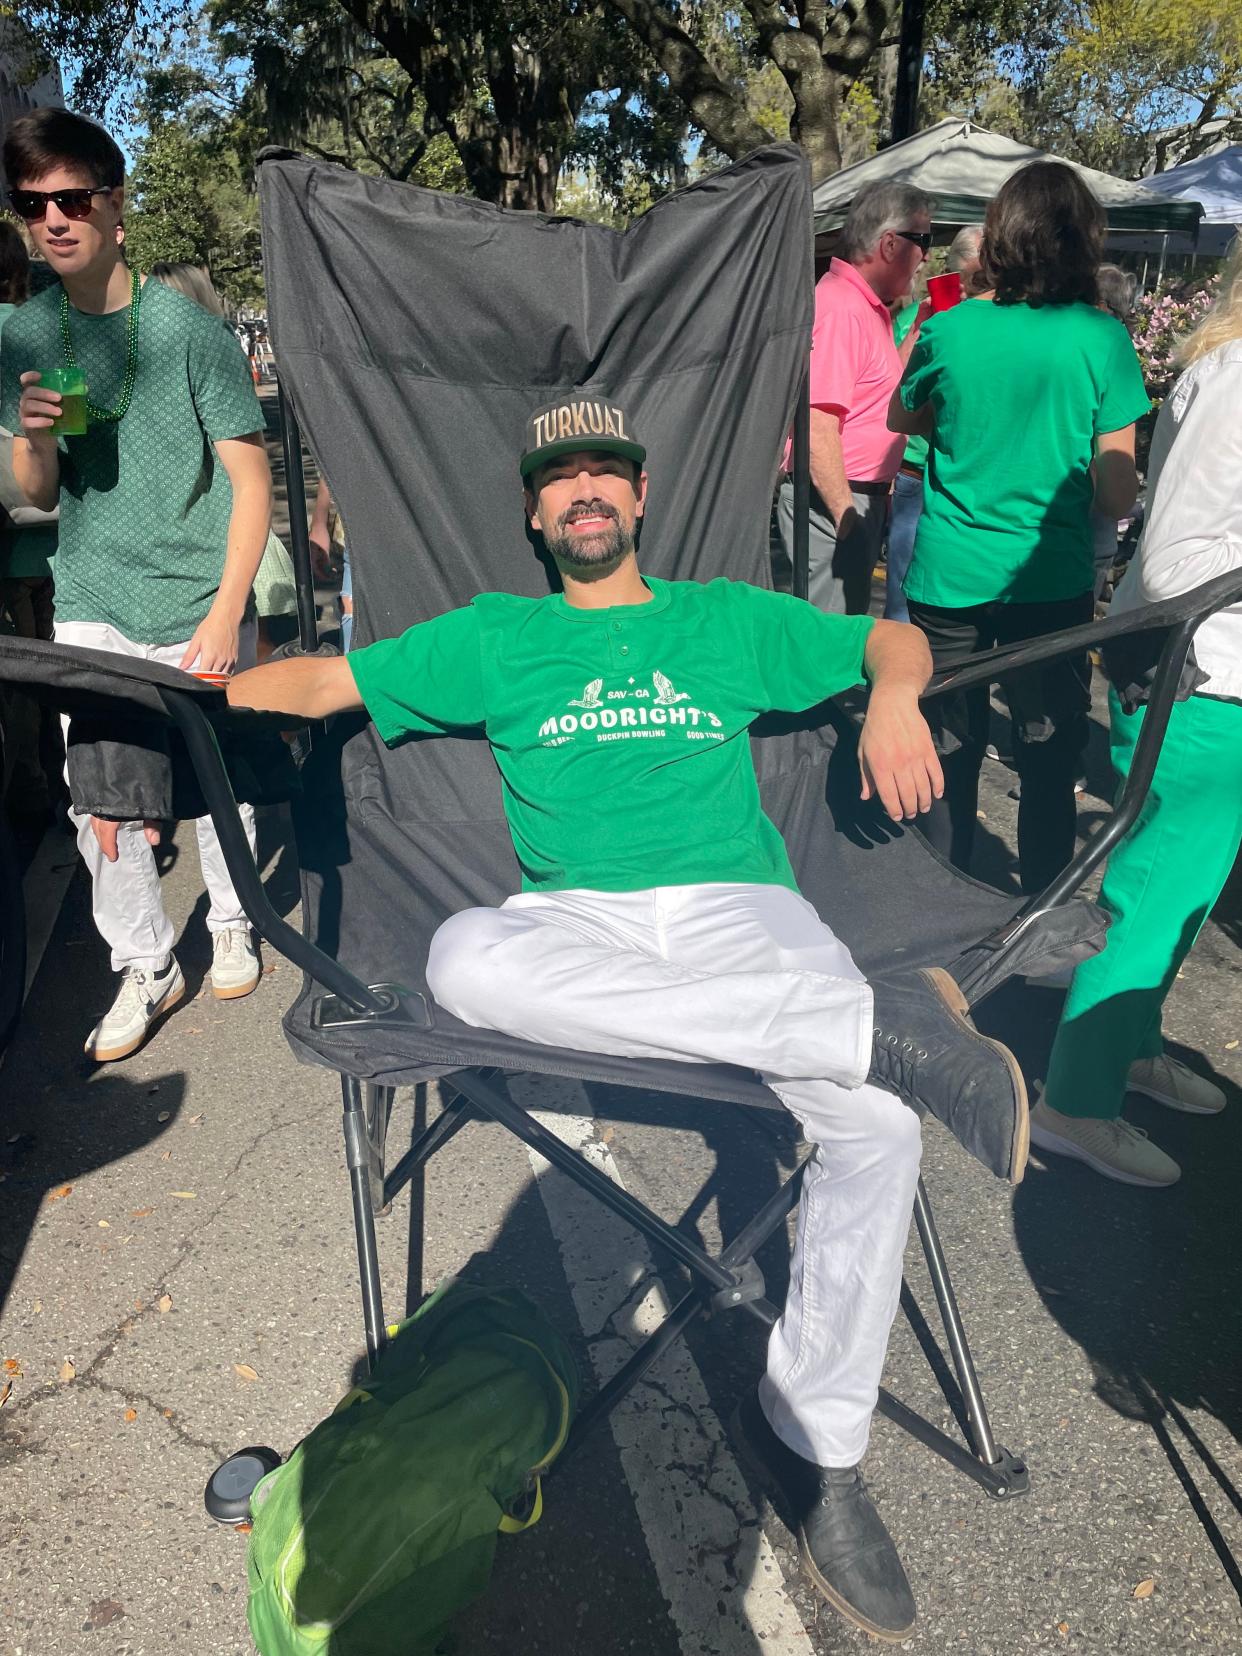 Hill Lawrence relaxes in his oversized chair on Liberty Street.